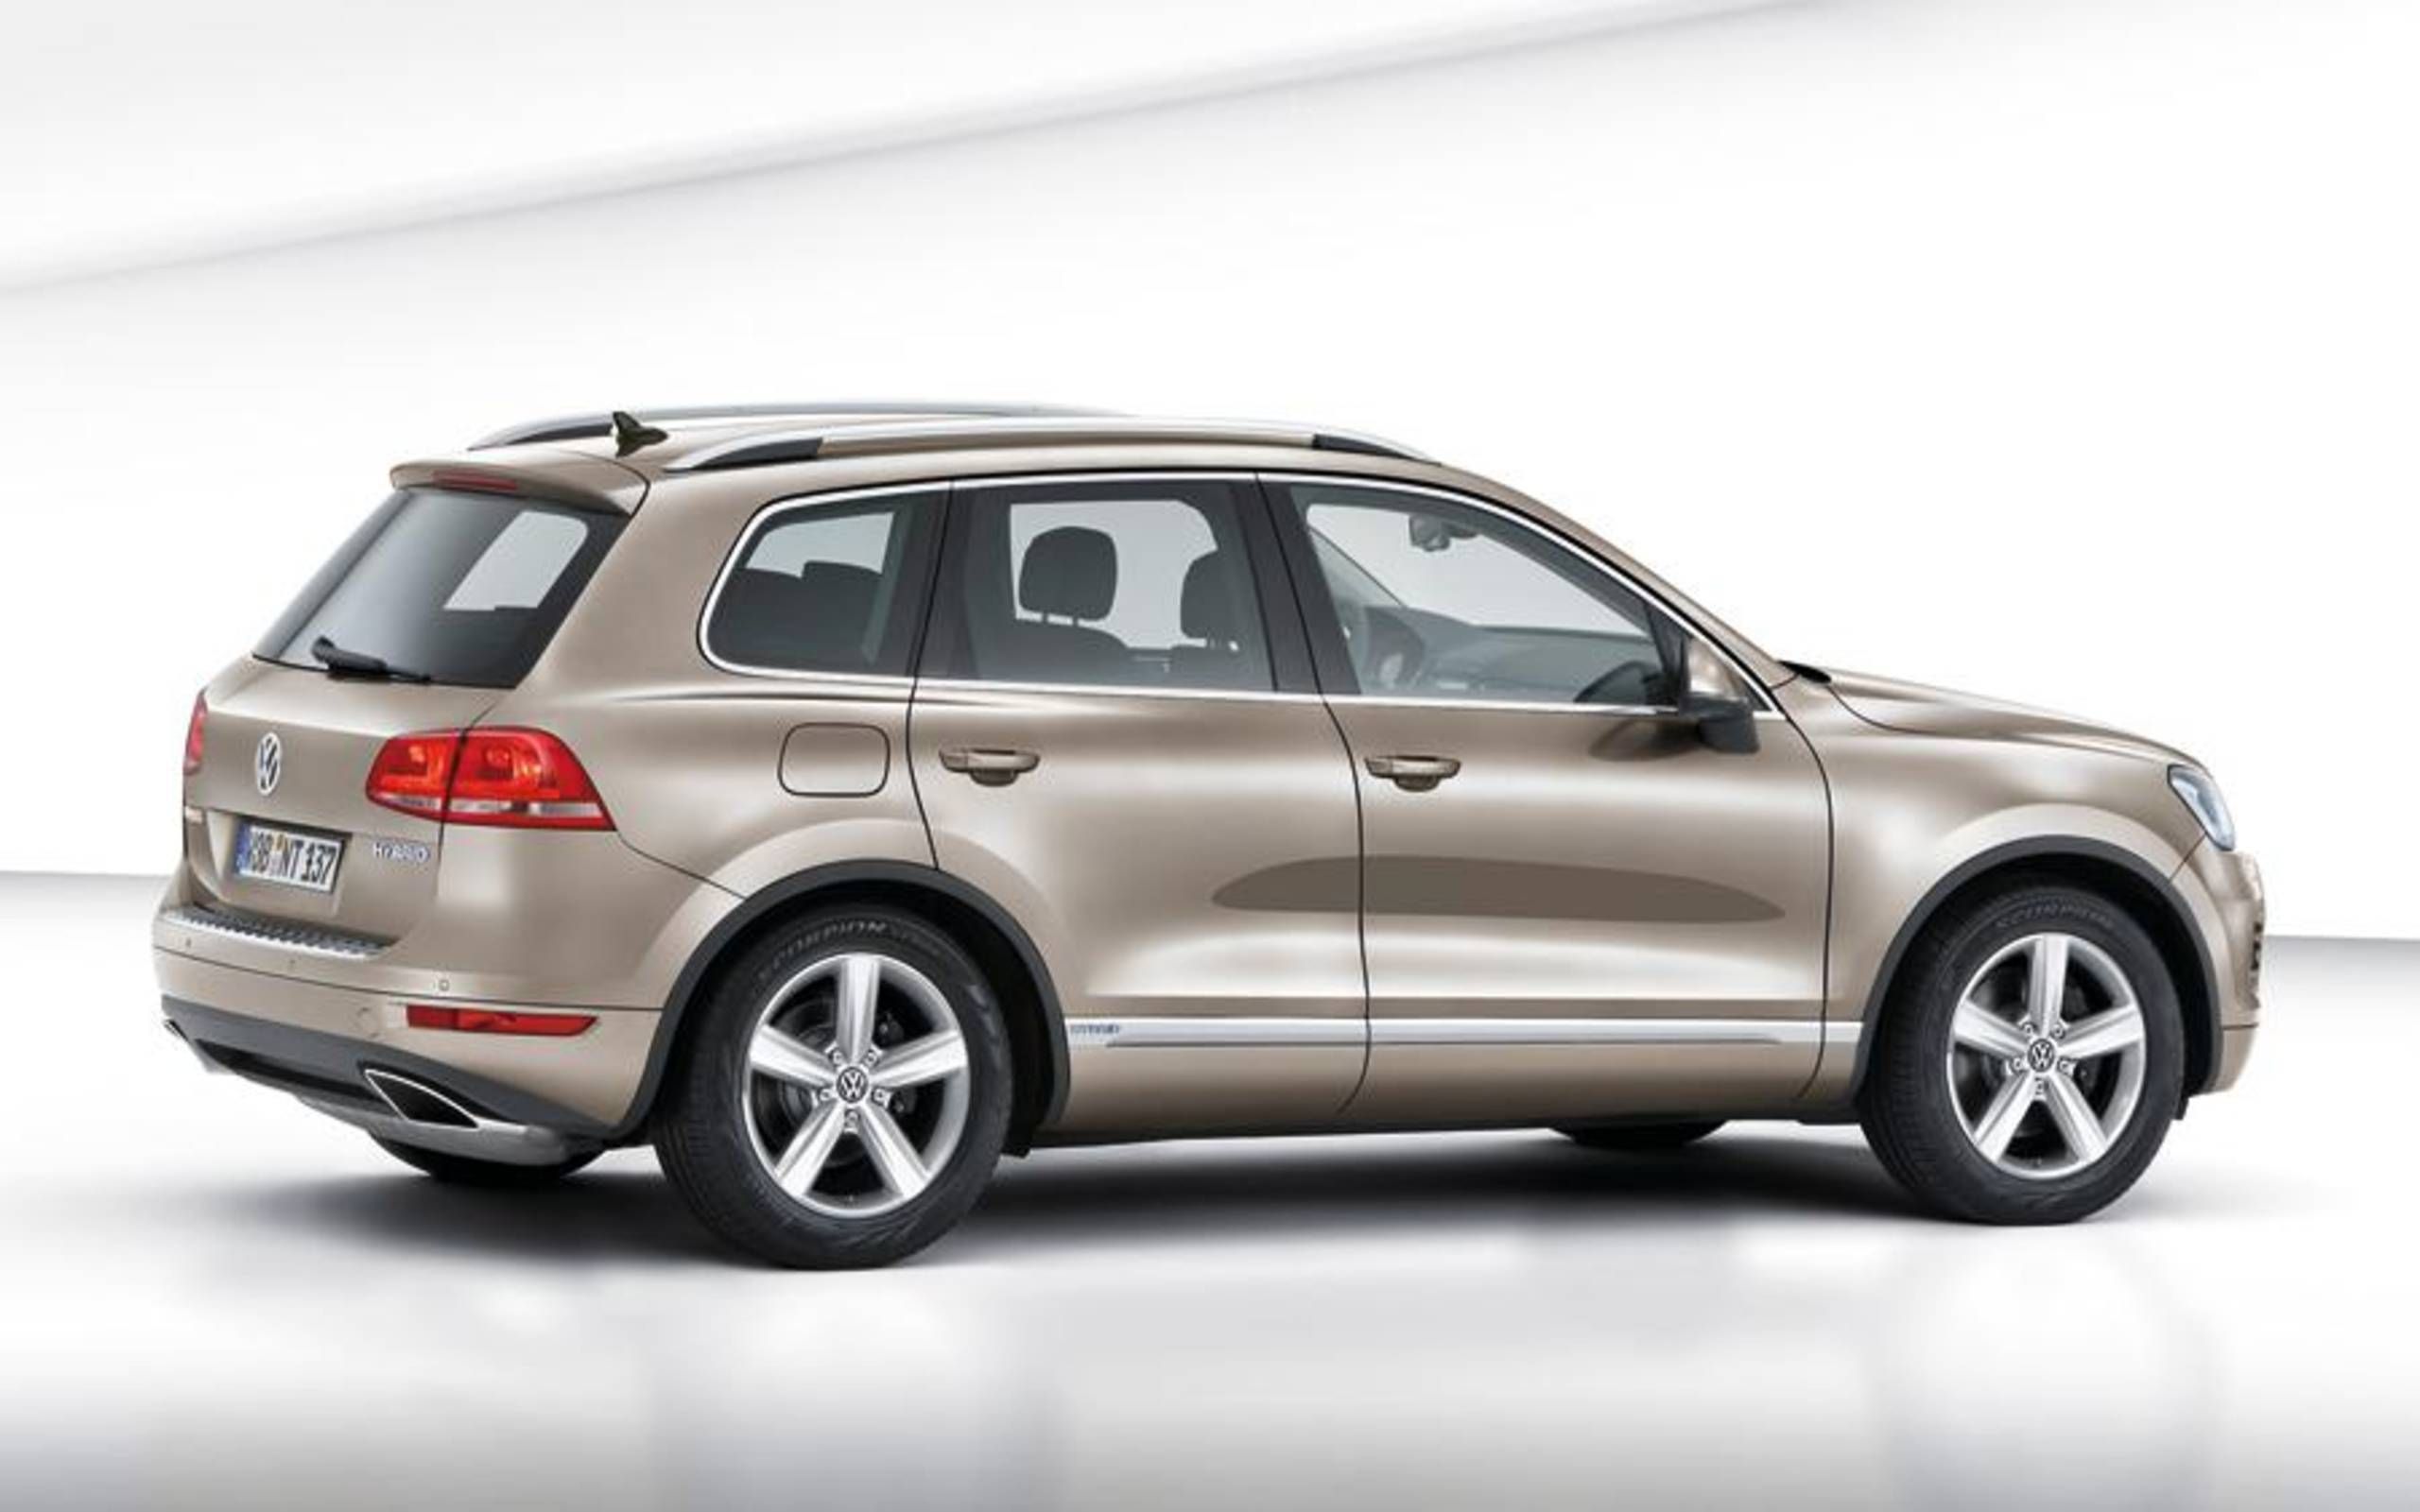 The 2011 Volkswagen Touareg rolls out with a new hybrid powertrain